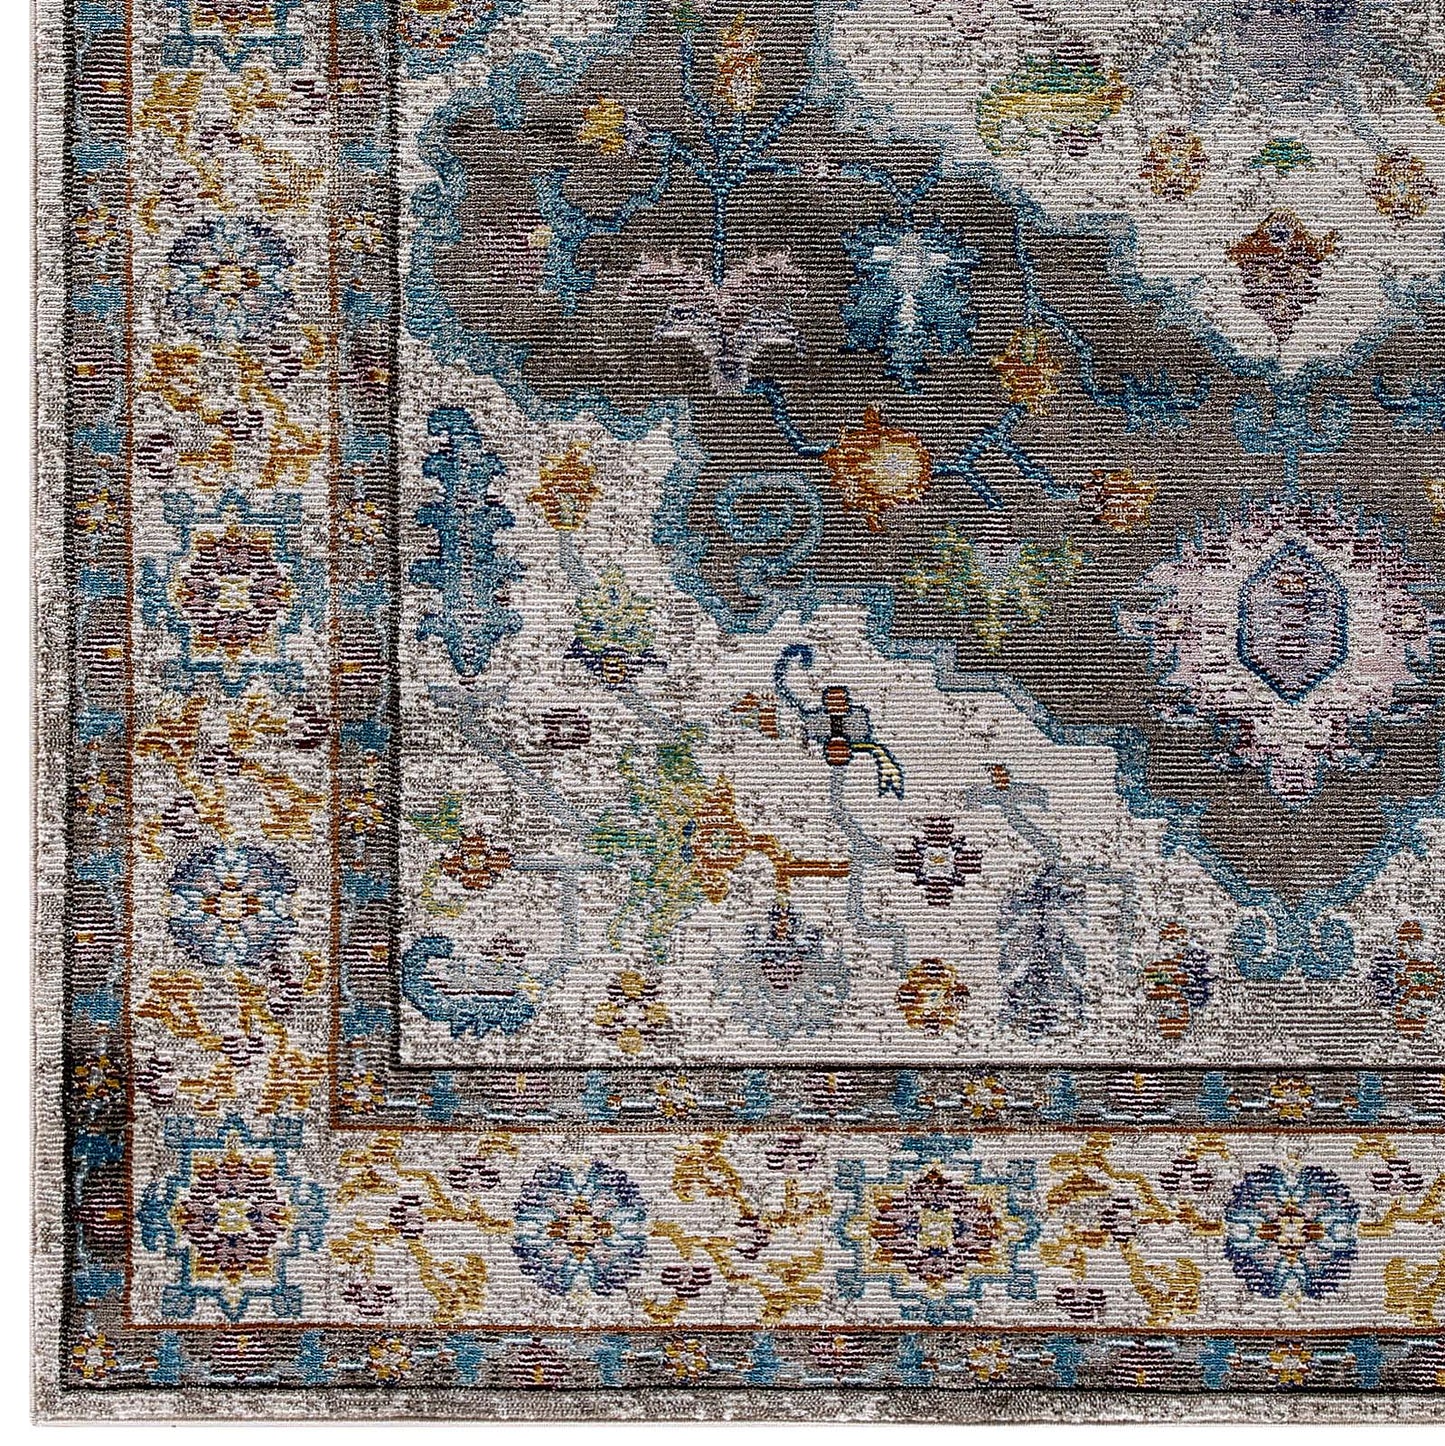 Success Anisah Distressed Floral Persian Medallion 8x10 Area Rug Gray, Ivory, Yellow, Orange R-1163A-810